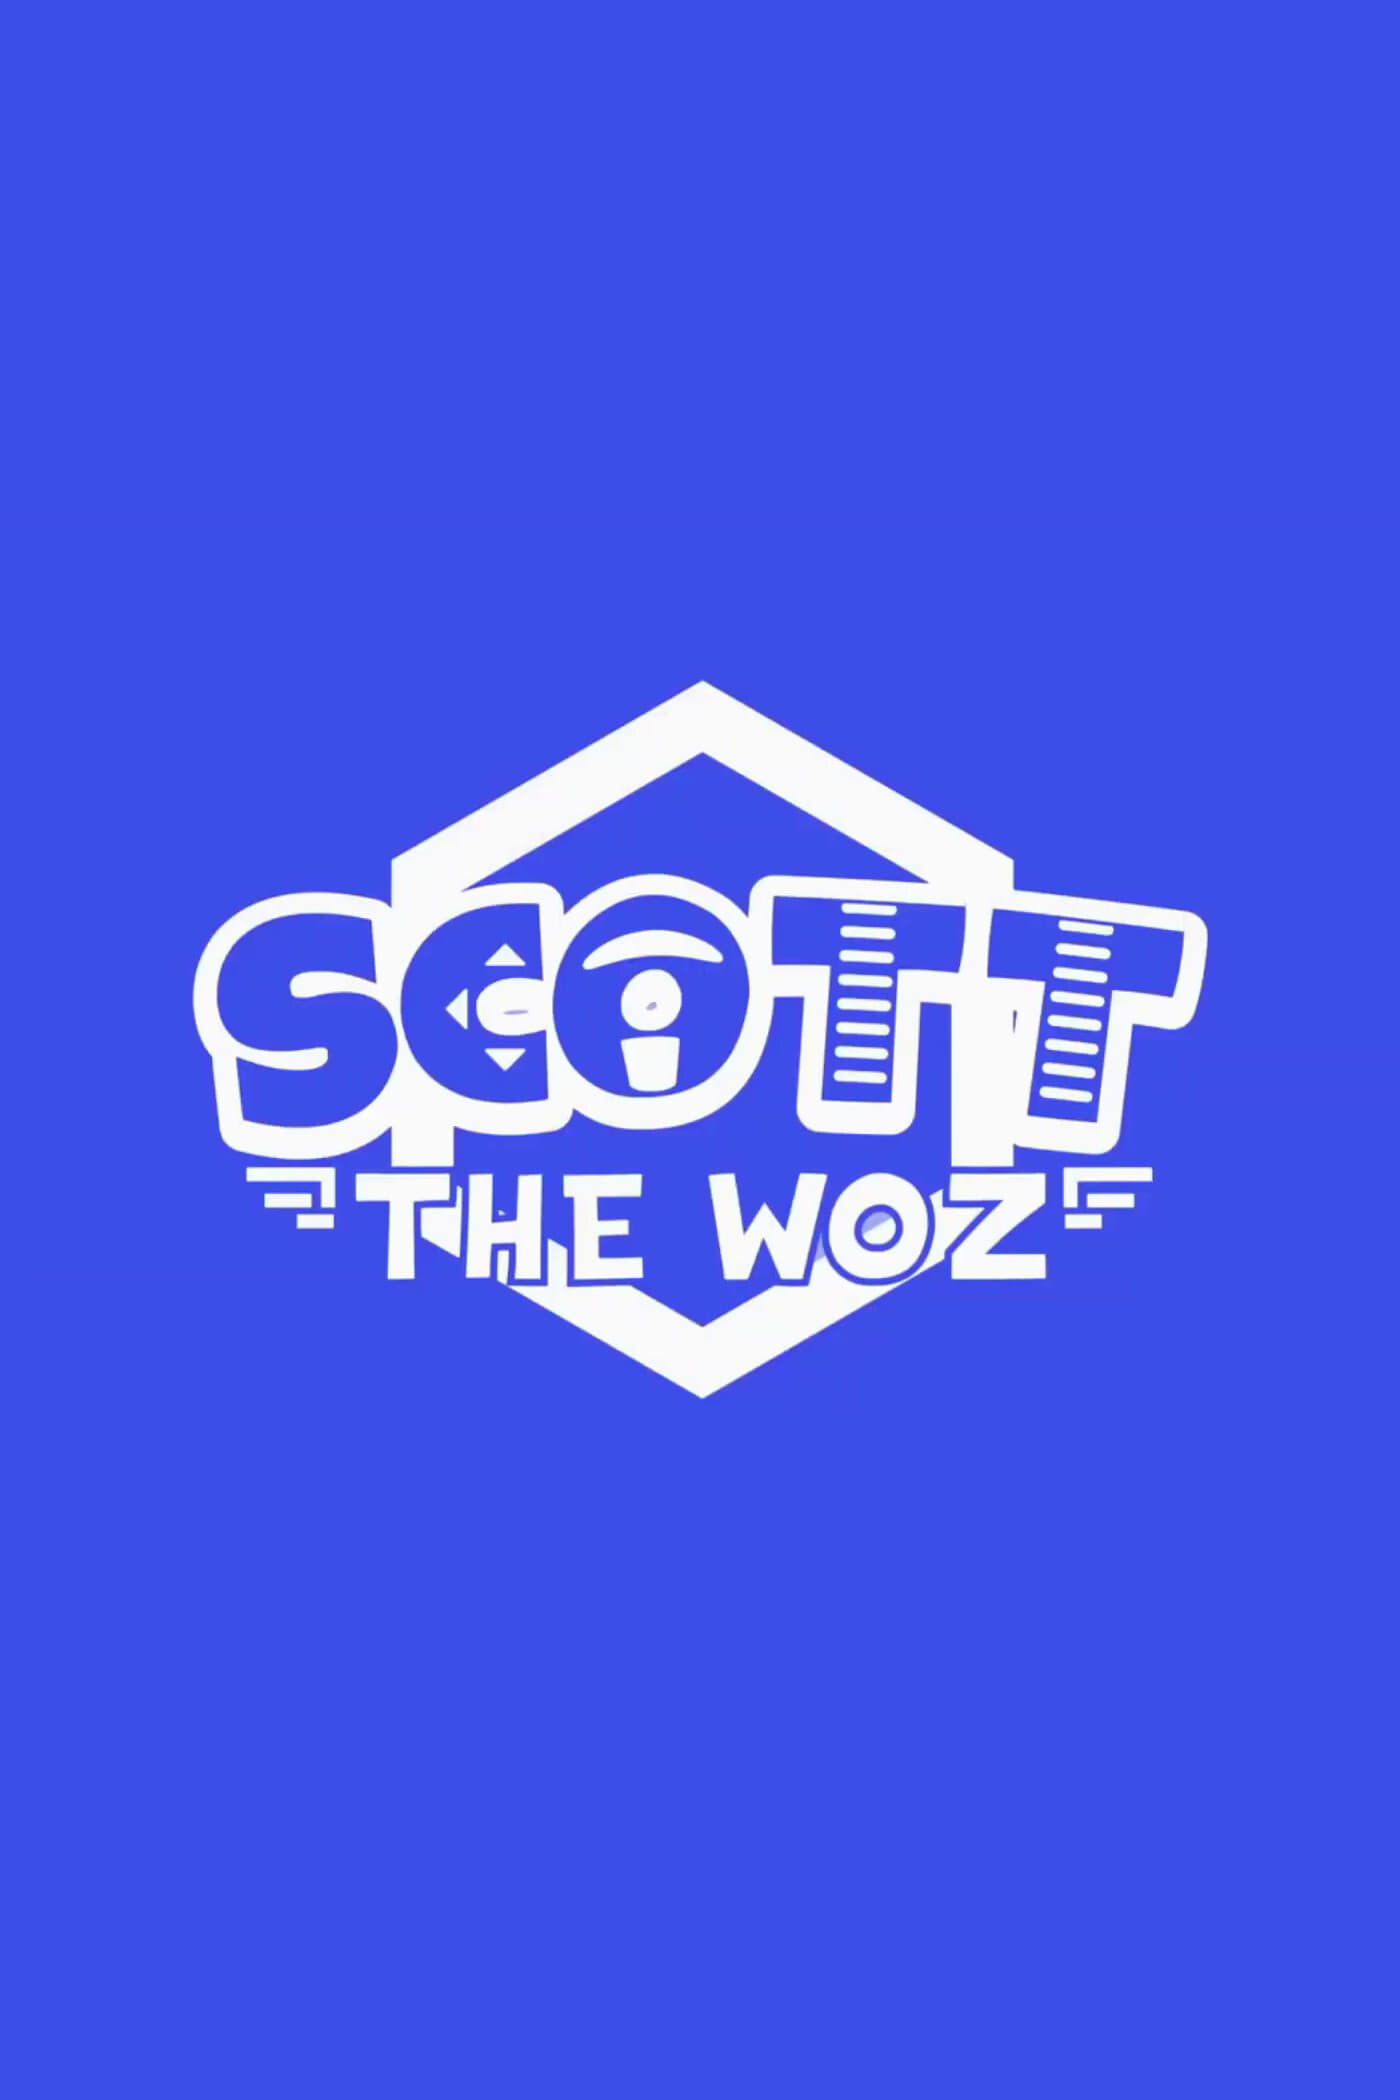 Scott the Woz TV Shows About Games